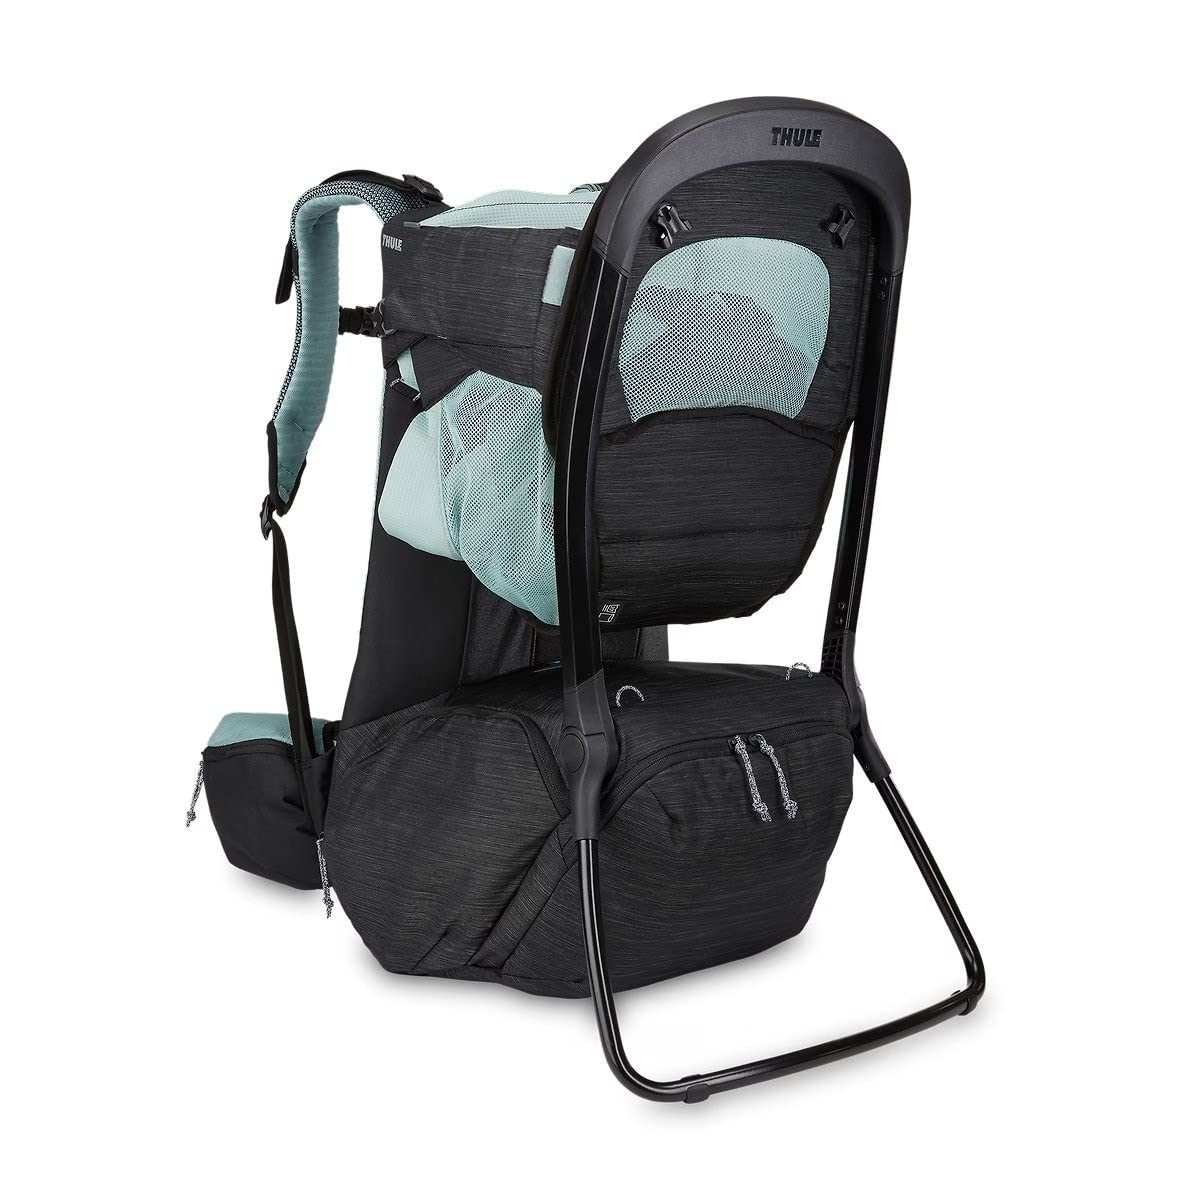 Thule Sapling Child Carrier Backpack - Machine Washable Seat - Self-Standing Frame - Adjustable padded straps for parents - Ergonomic seat with under-leg support for child - UPF 50 Sunshade